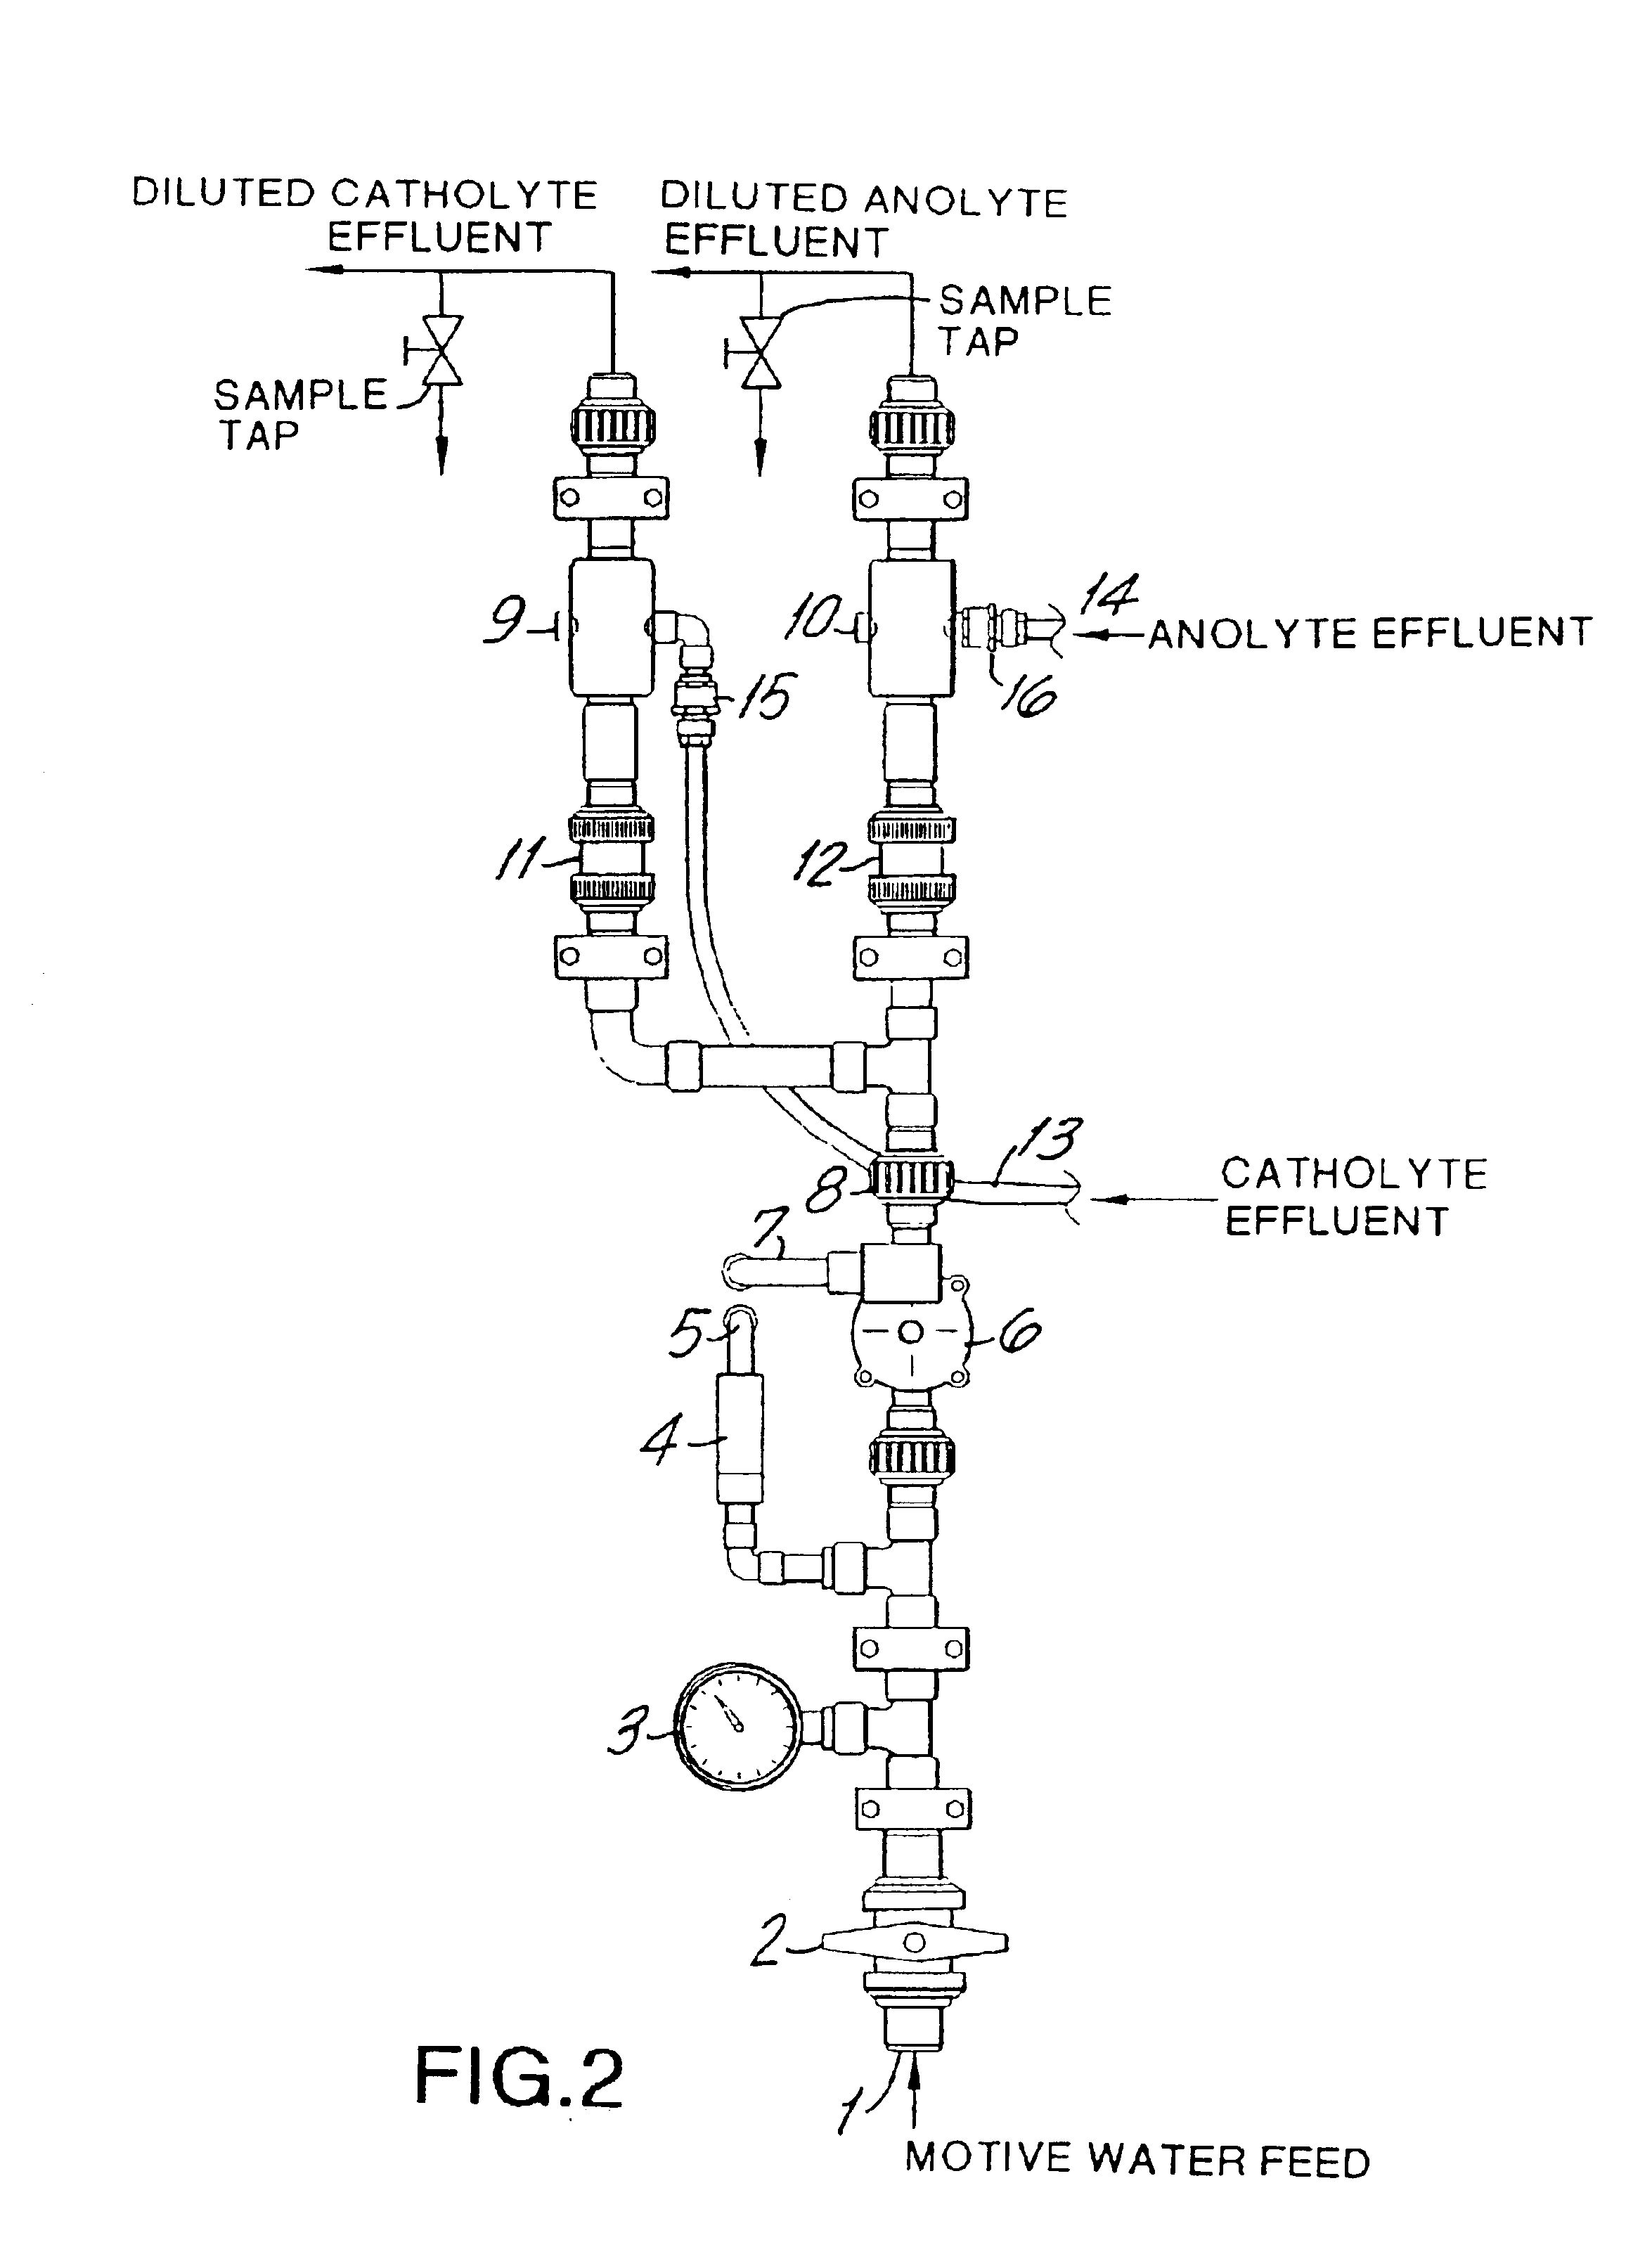 Generator for generating chlorine dioxide under vacuum eduction in a single pass